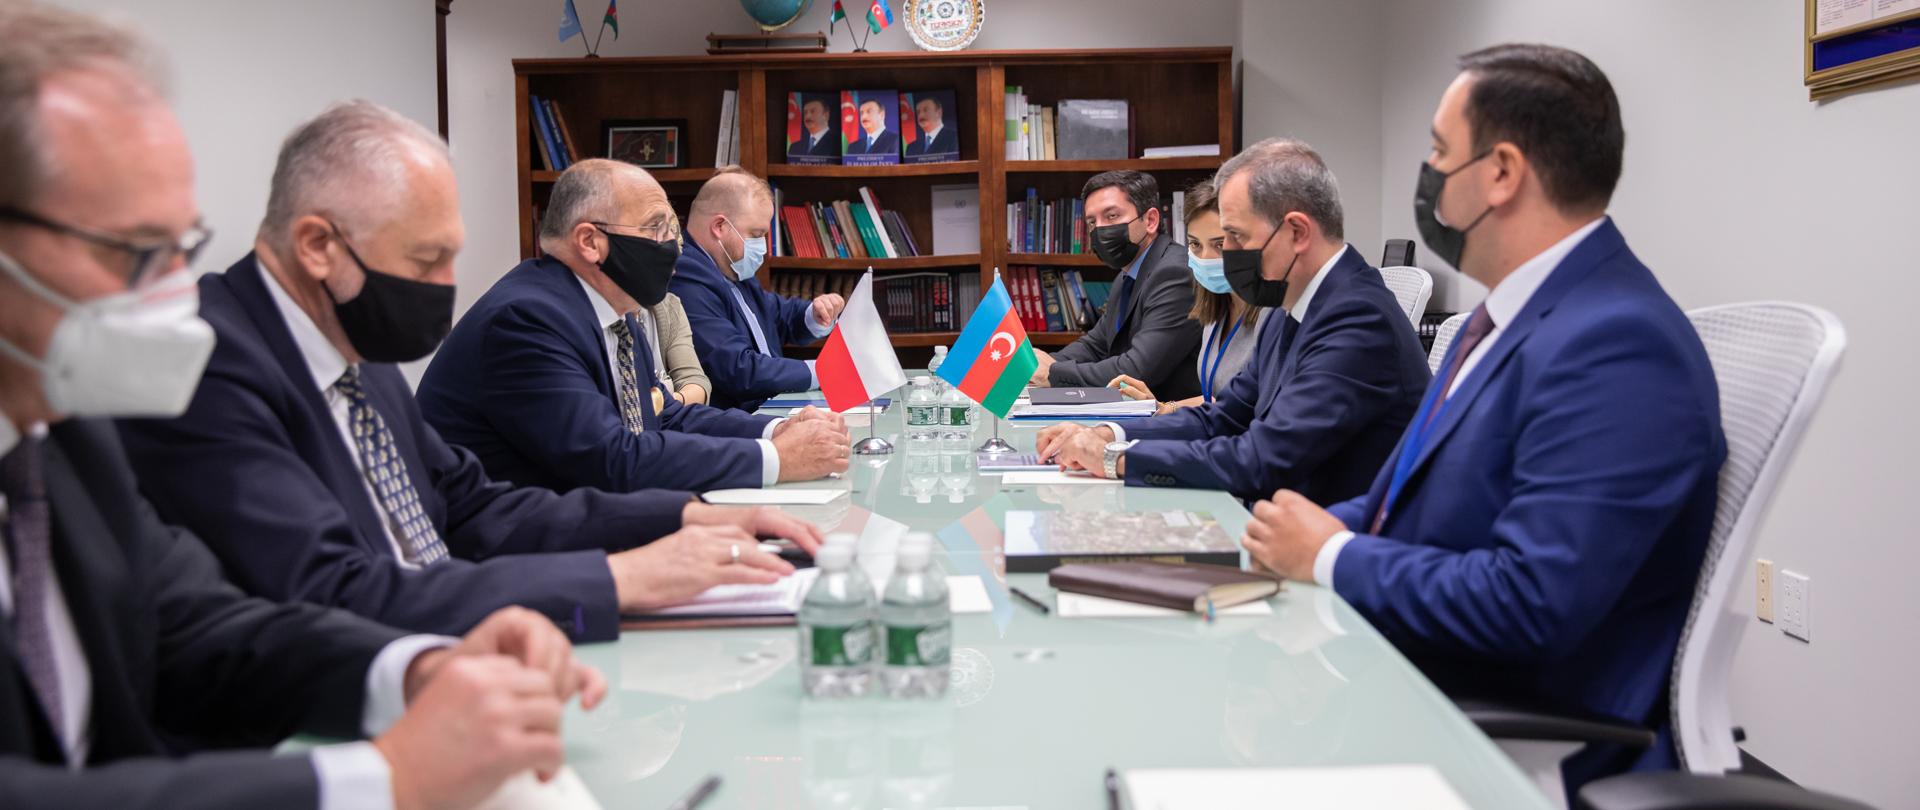 Bilateral meeting of the Minister of Foreign Affairs Zbigniew Rau and the Minister of Foreign Affairs of the Republic of Azerbaijan Jeyhun Bayramov